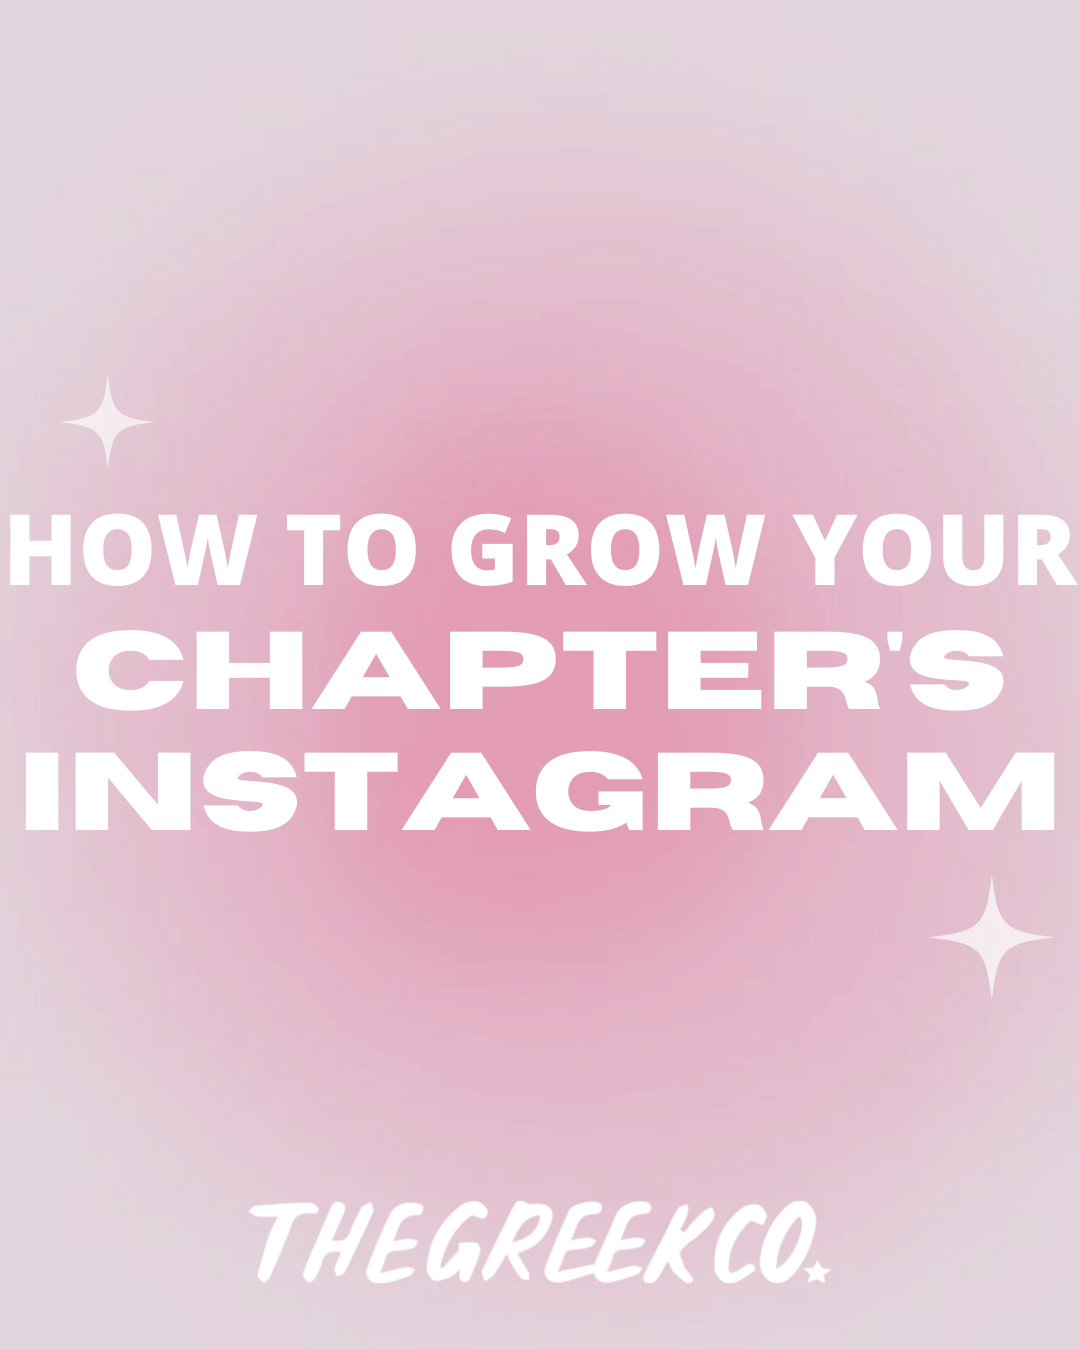 How to Grow Your Chapter's Instagram - The Greek Co. Blog Post